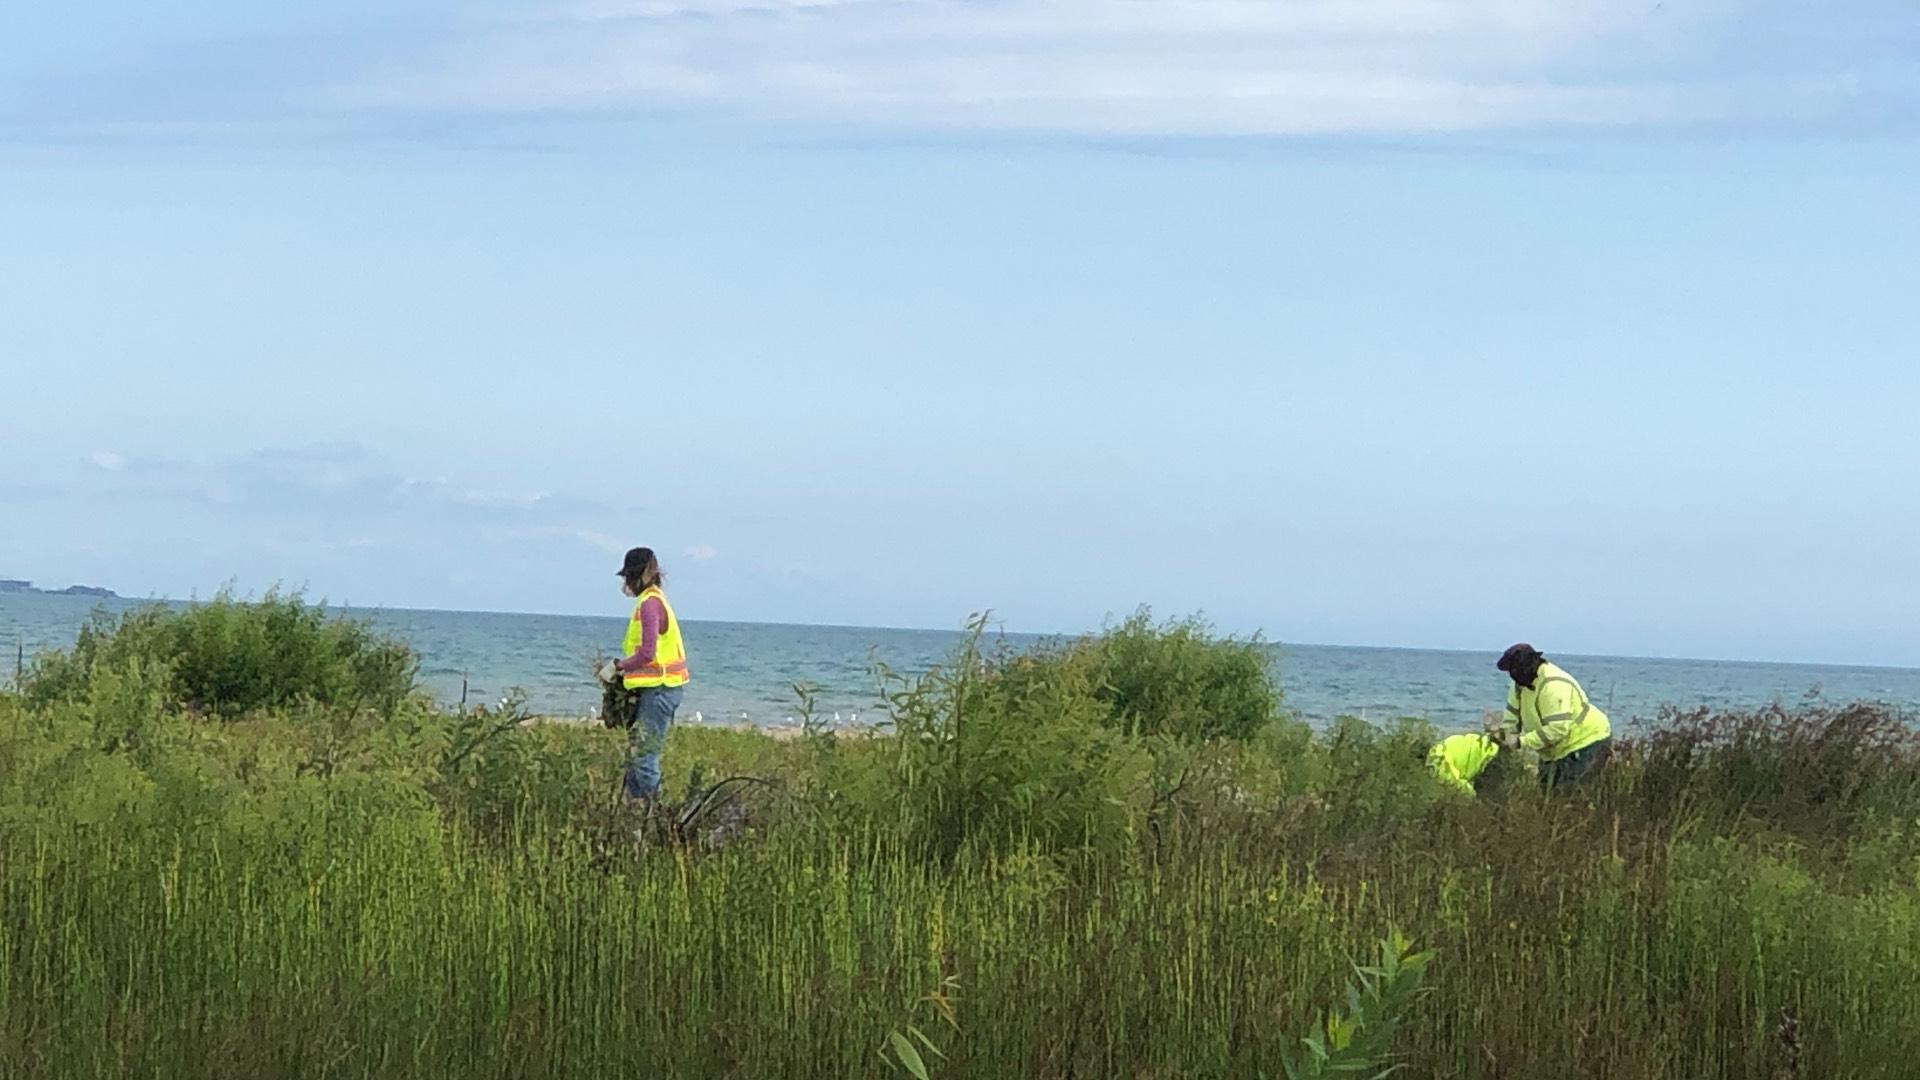 Contractors were on site at the dune in mid-July. (Patty Wetli / WTTW News)